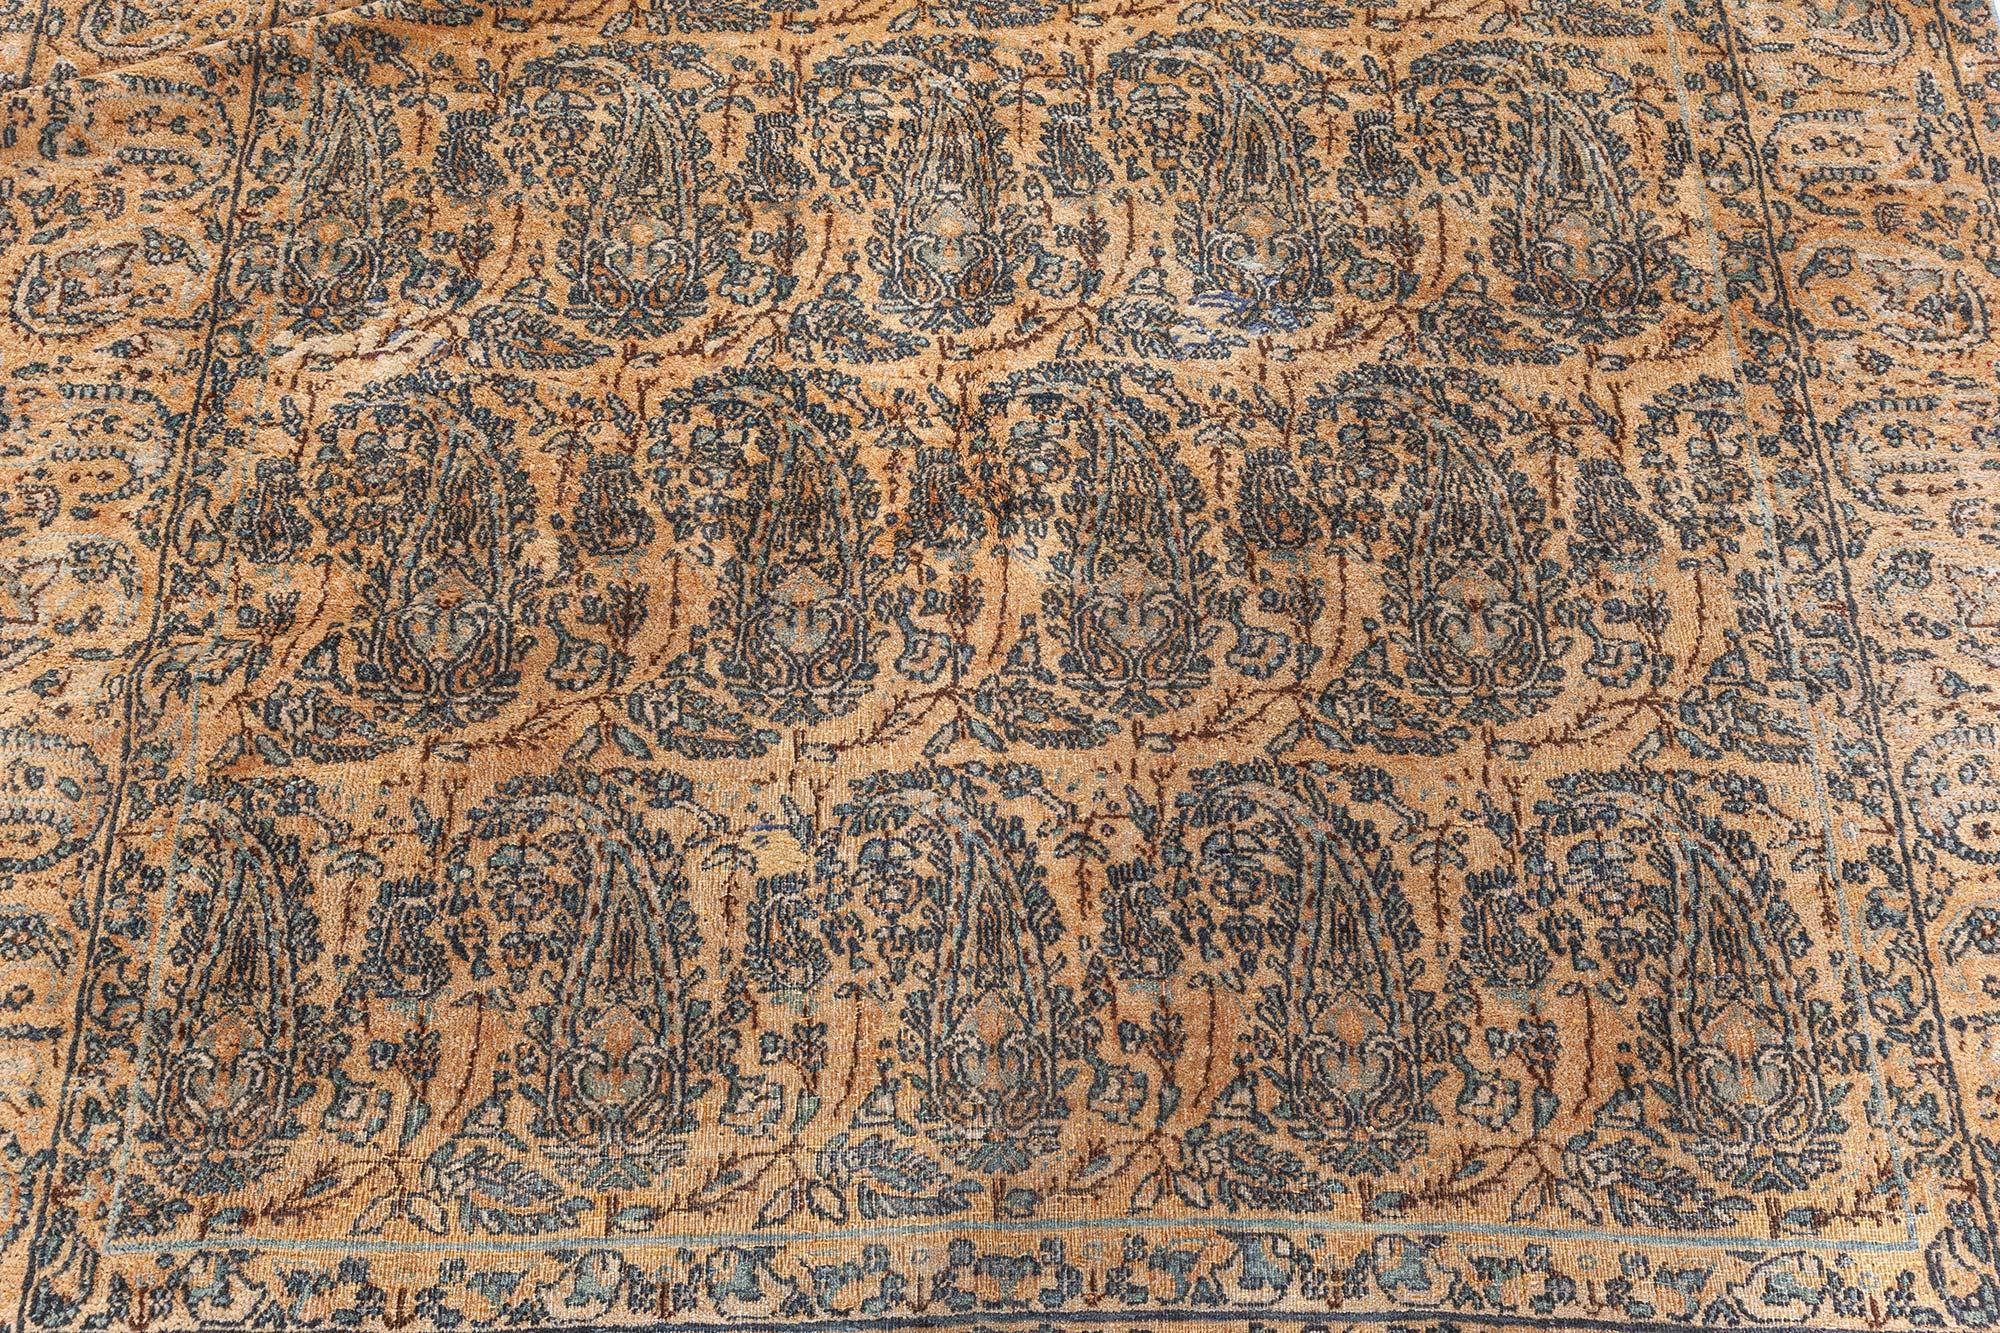 19th century Persian Tabriz yellow and black handwoven wool rug
Size: 4'4